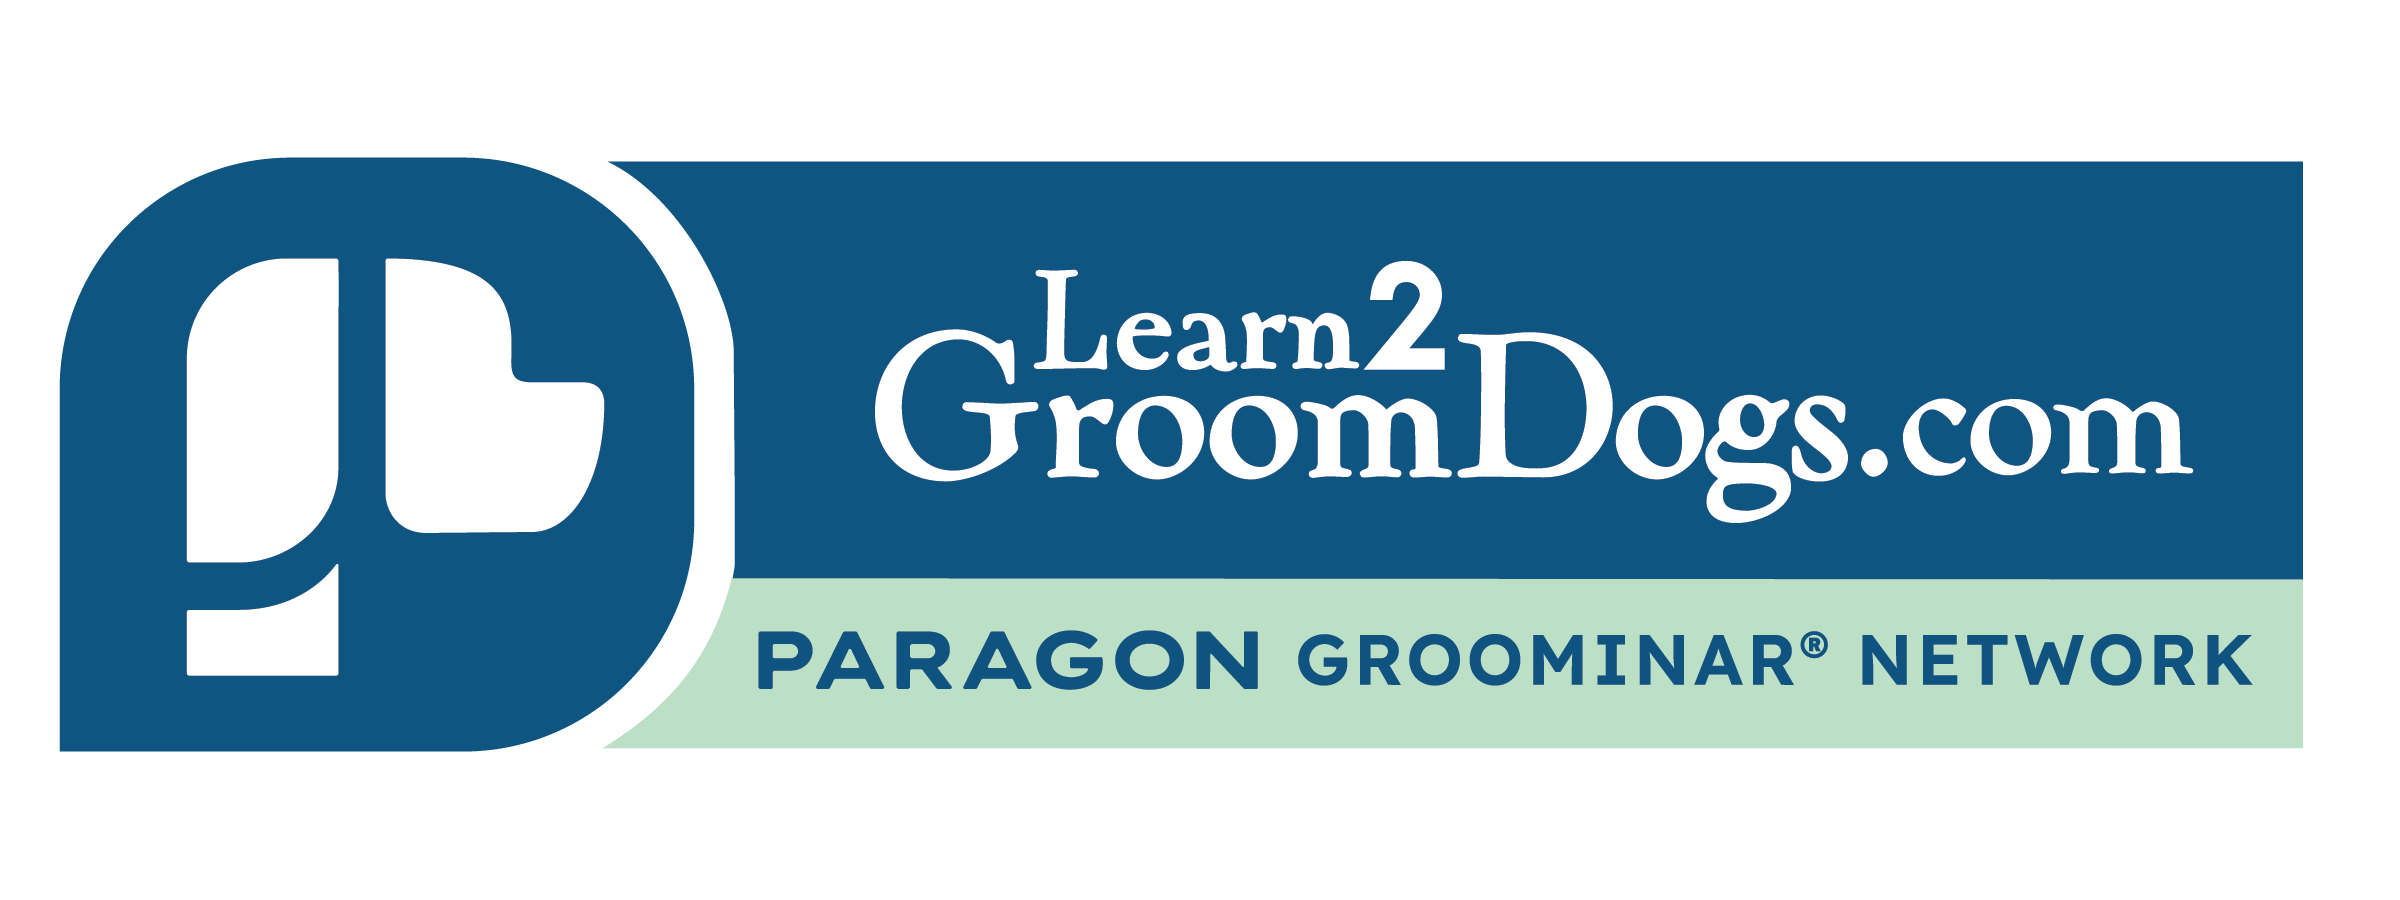 Learn2GroomDogs - The World's Largest & Best Library of Professional Dog Grooming Videos